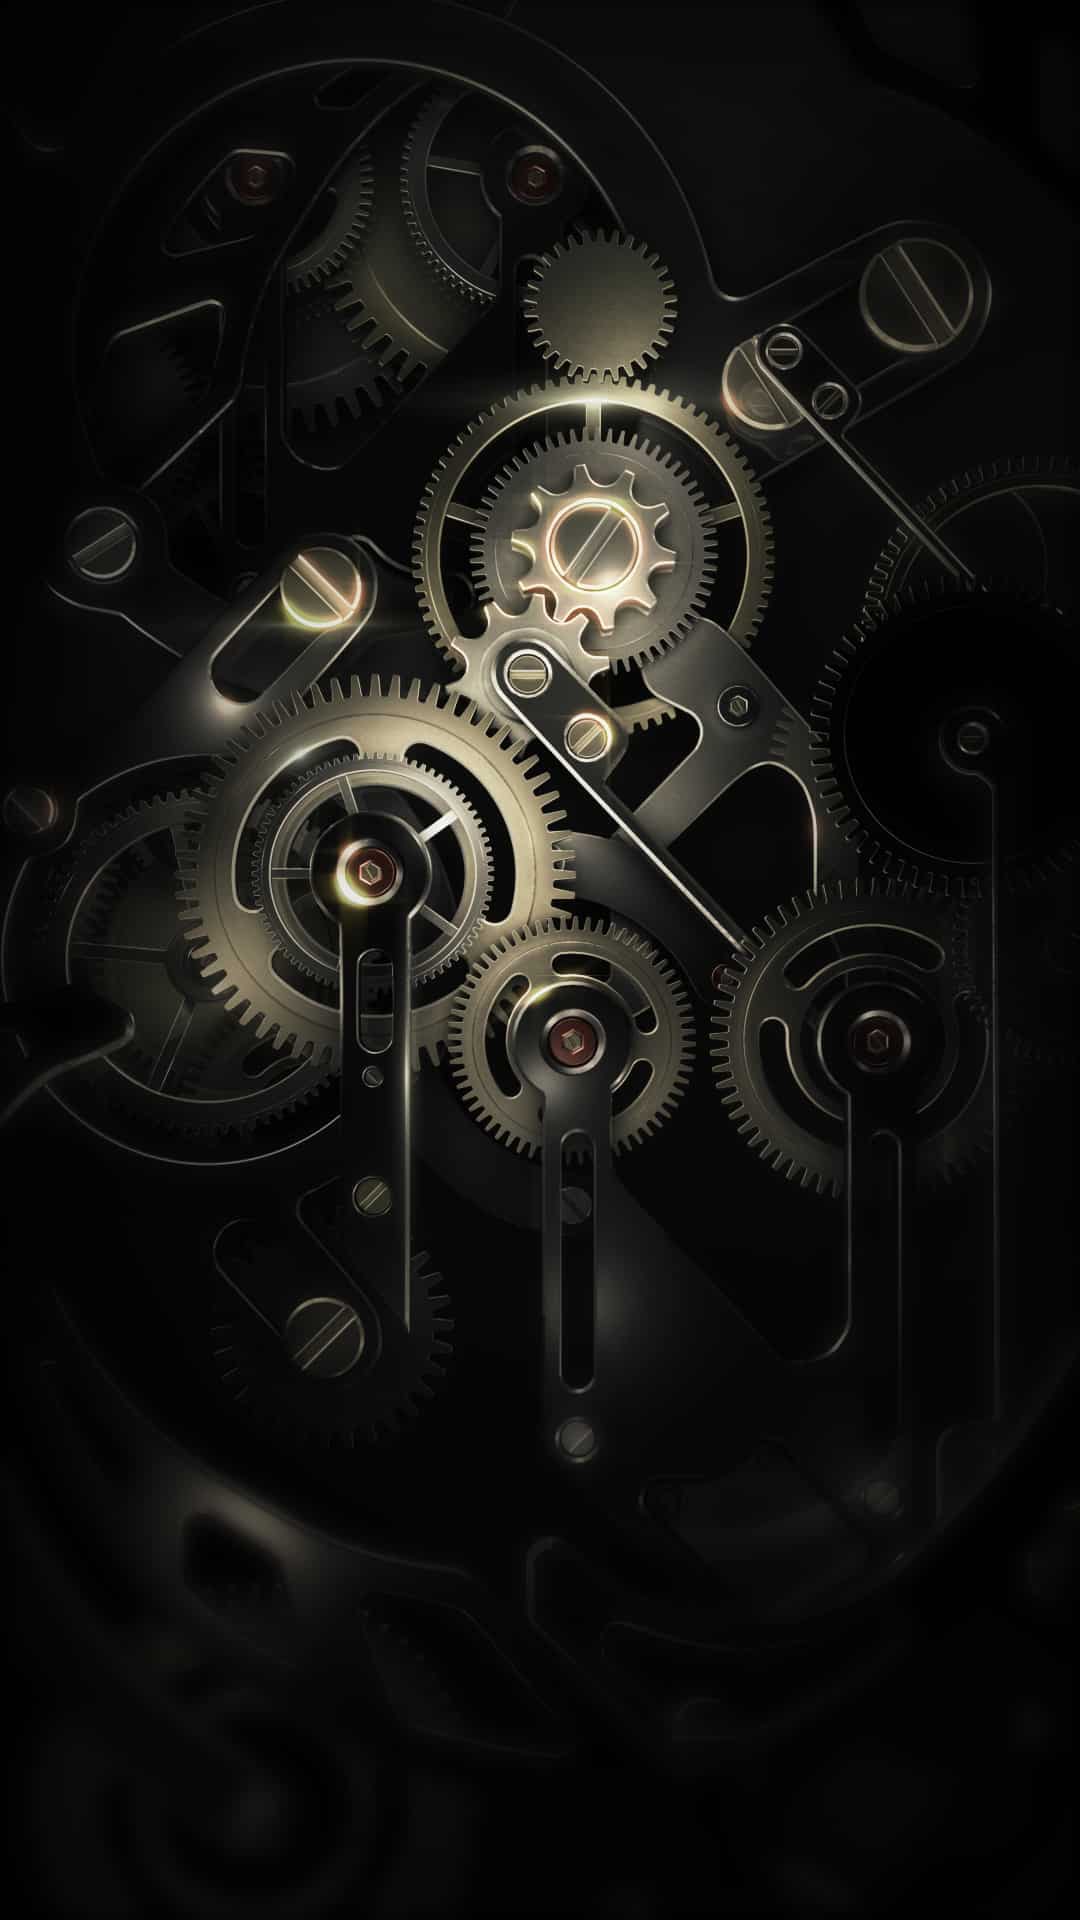 Free Download Mechanical Wallpaper For Mobile 1080x19 Download Hd 1080x19 For Your Desktop Mobile Tablet Explore 19 Mechanical Wallpaper Mechanical Background Wallpaper Mechanical Desktop Wallpaper Mechanical Wallpaper Hd